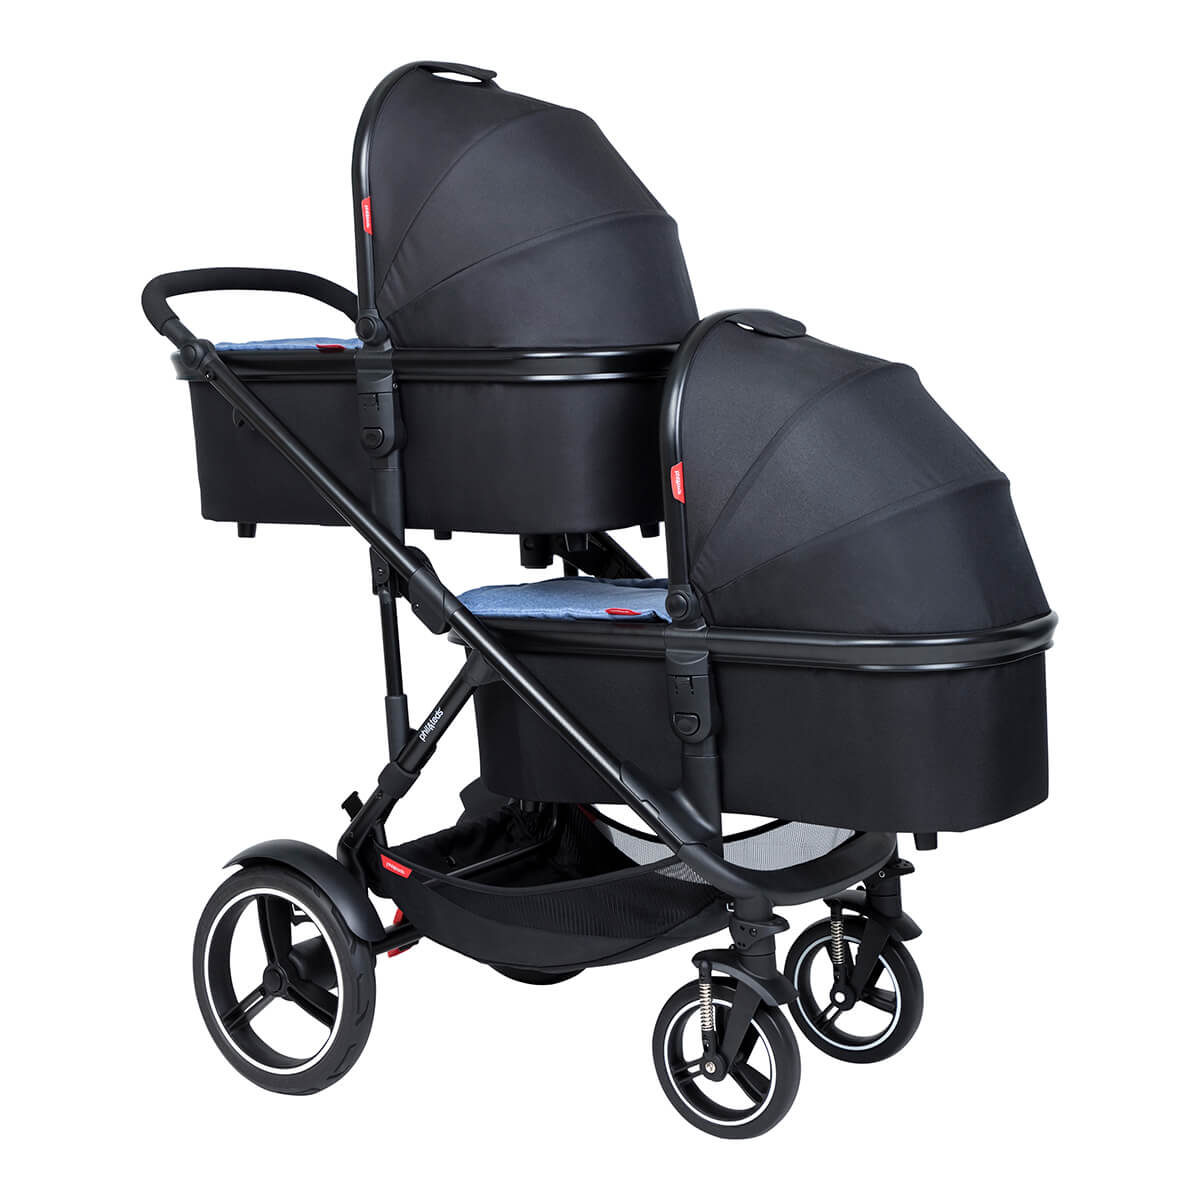 https://cdn.accentuate.io/4509528850520/19272668414040/philteds-voyager-inline-buggy-with-double-snug-carrycots-v1626484588444.jpg?1200x1200